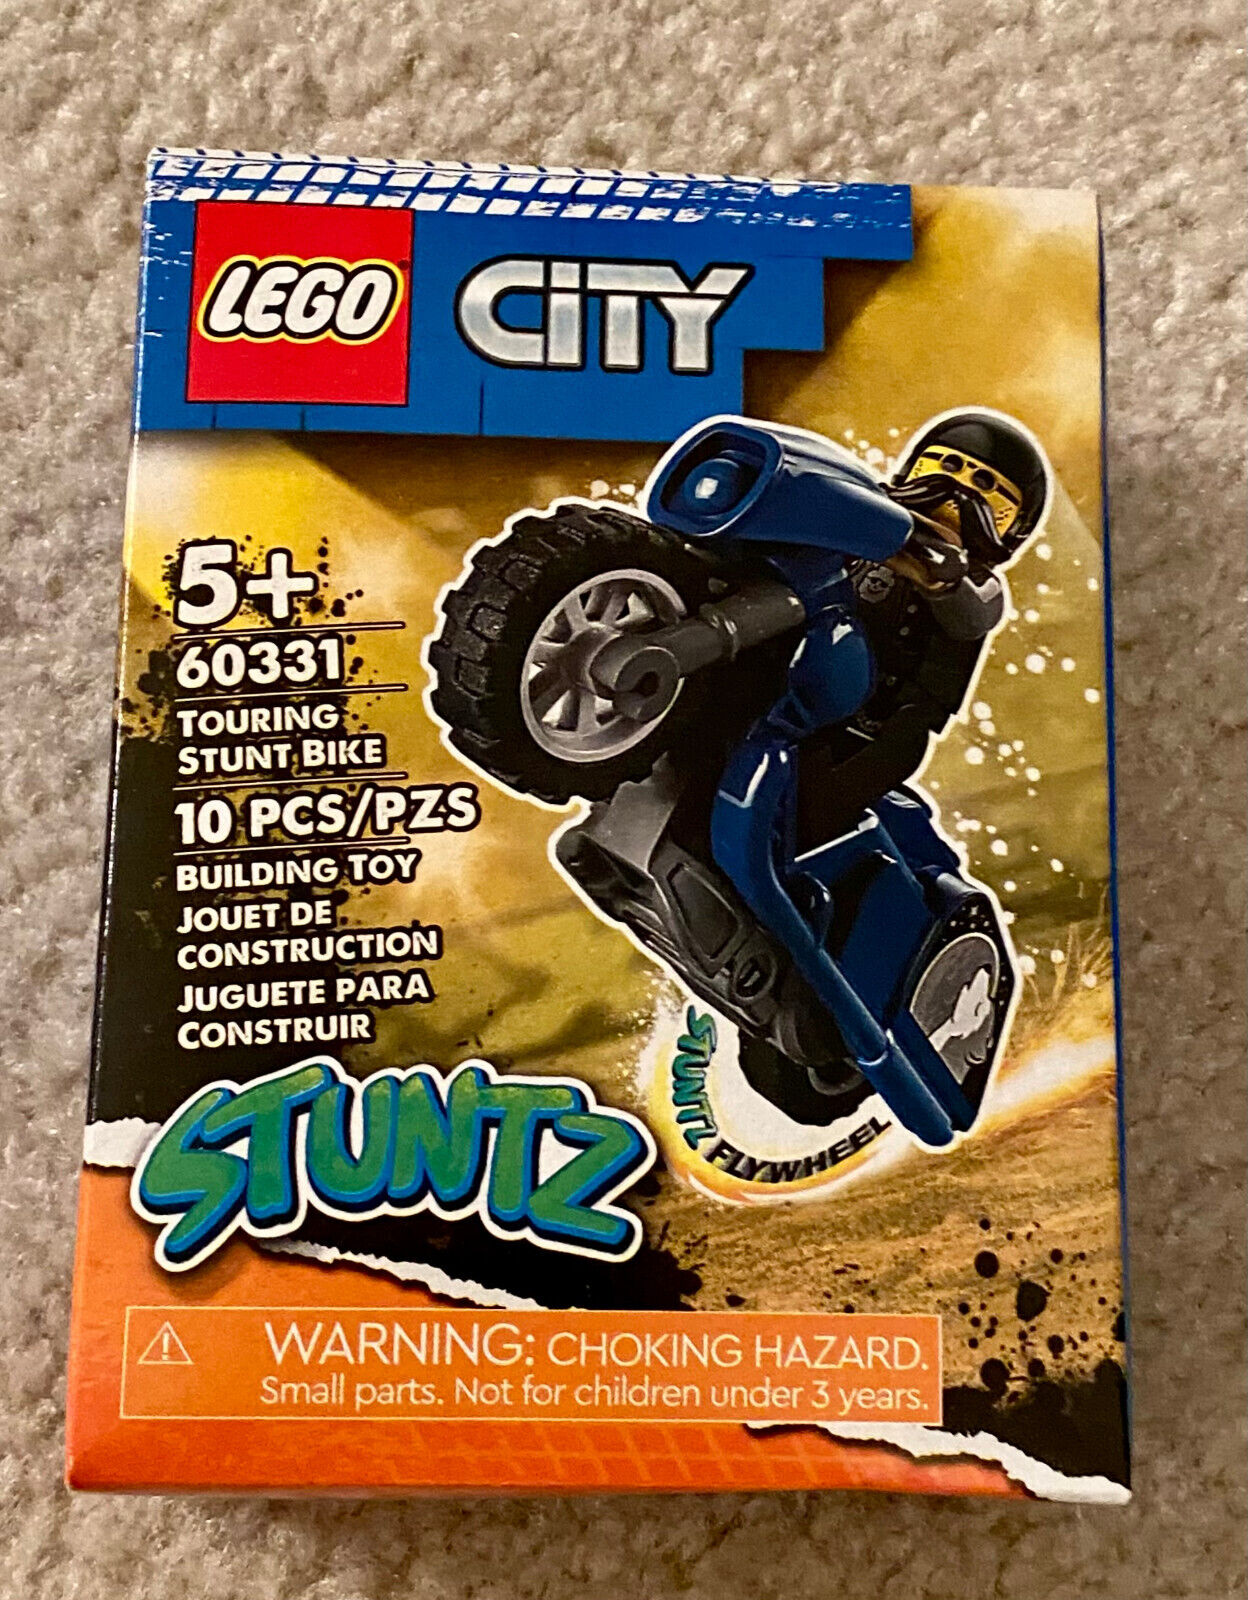 Lego City 60331 Touring Stunt Bike Retired Sealed New in Box Complete Set